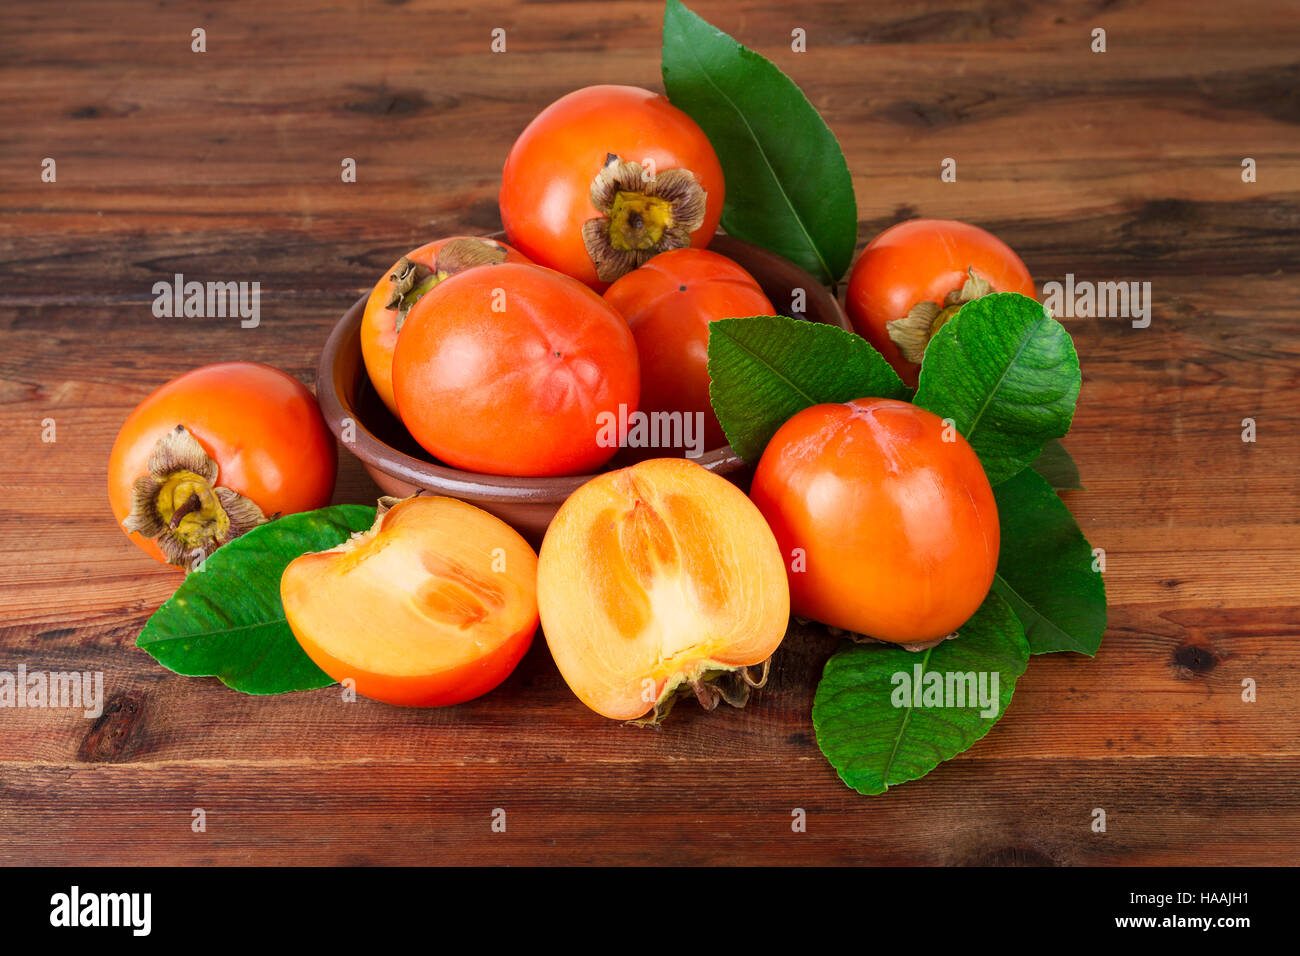 Persimmons with green leaves on old wooden background Stock Photo